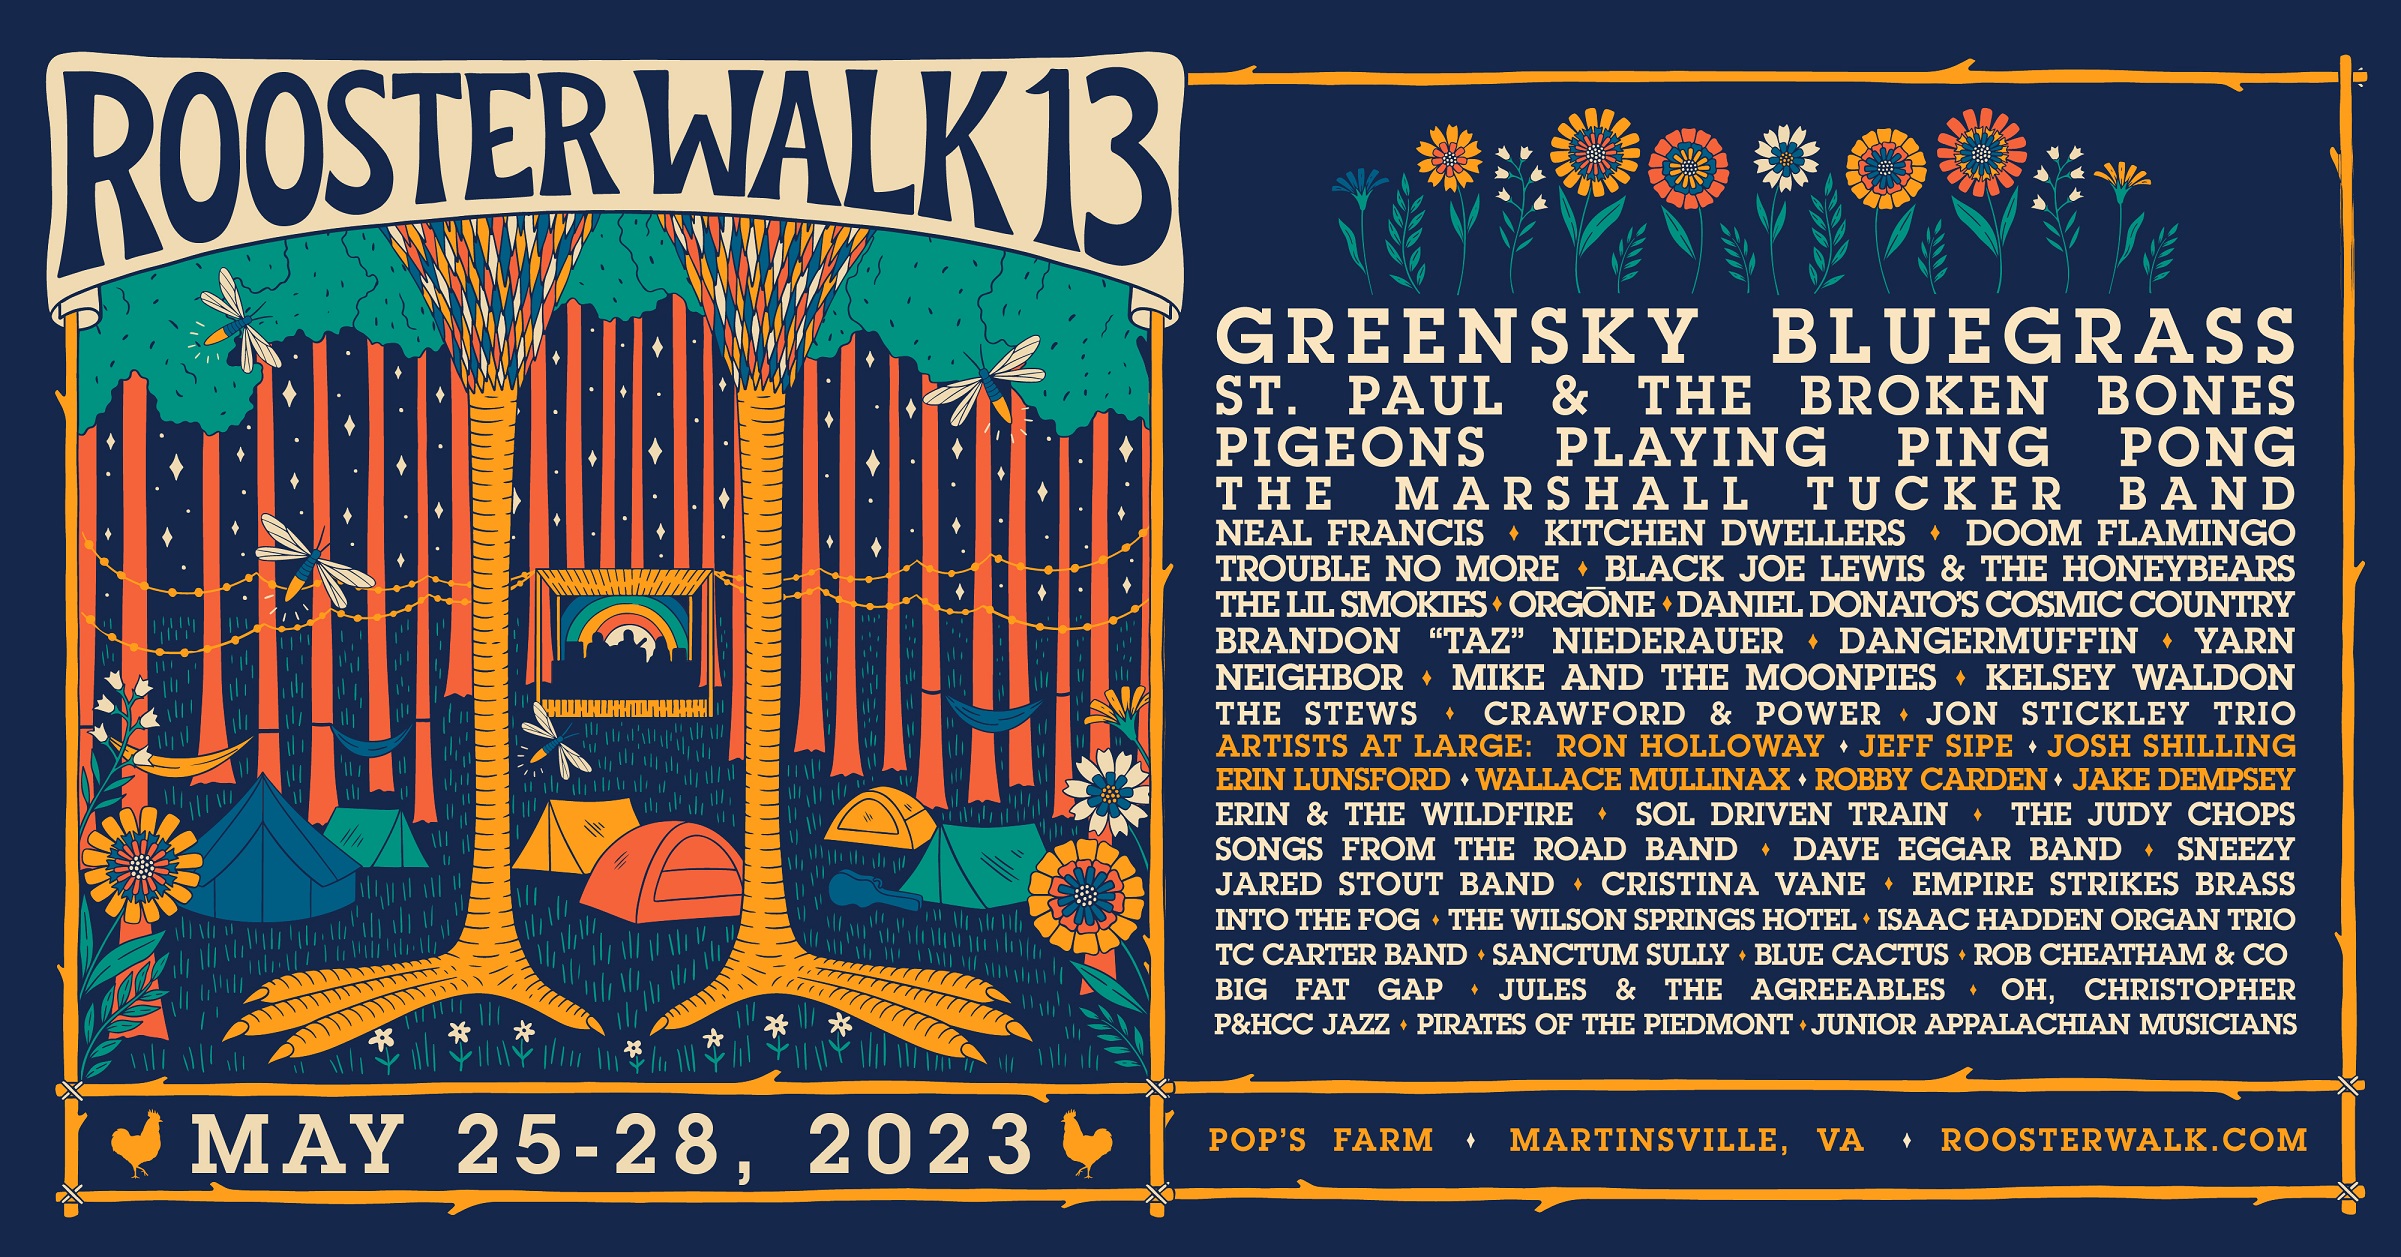 Nineteen band additions complete lineup for Rooster Walk 13 festival